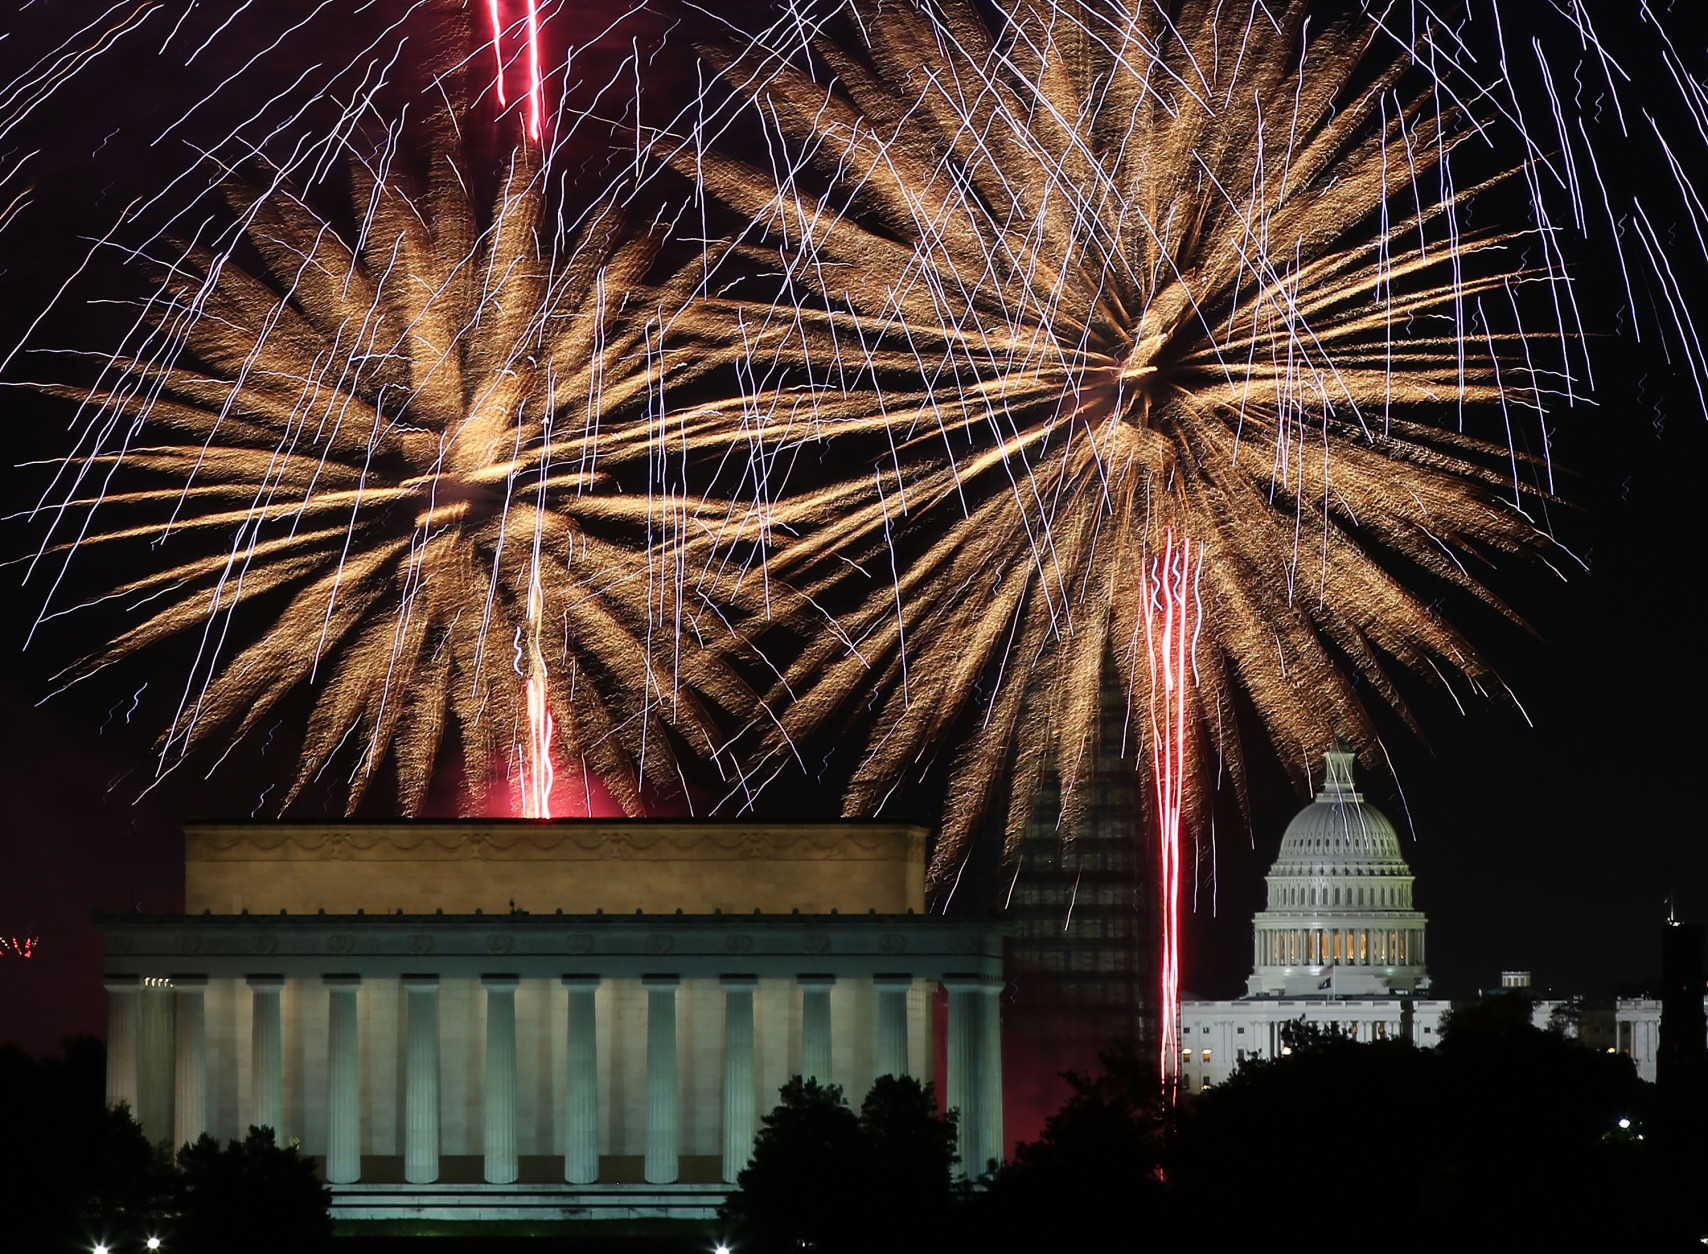 WASHINGTON, DC - JULY 04:  Fireworks light up the sky over the Lincoln Memorial, Washington Monument, and the U.S. Capitol on July 4, 2013 in Washington, DC. July 4th is a national holiday with the nation celebrating its 238th birthday.  (Photo by Mark Wilson/Getty Images)